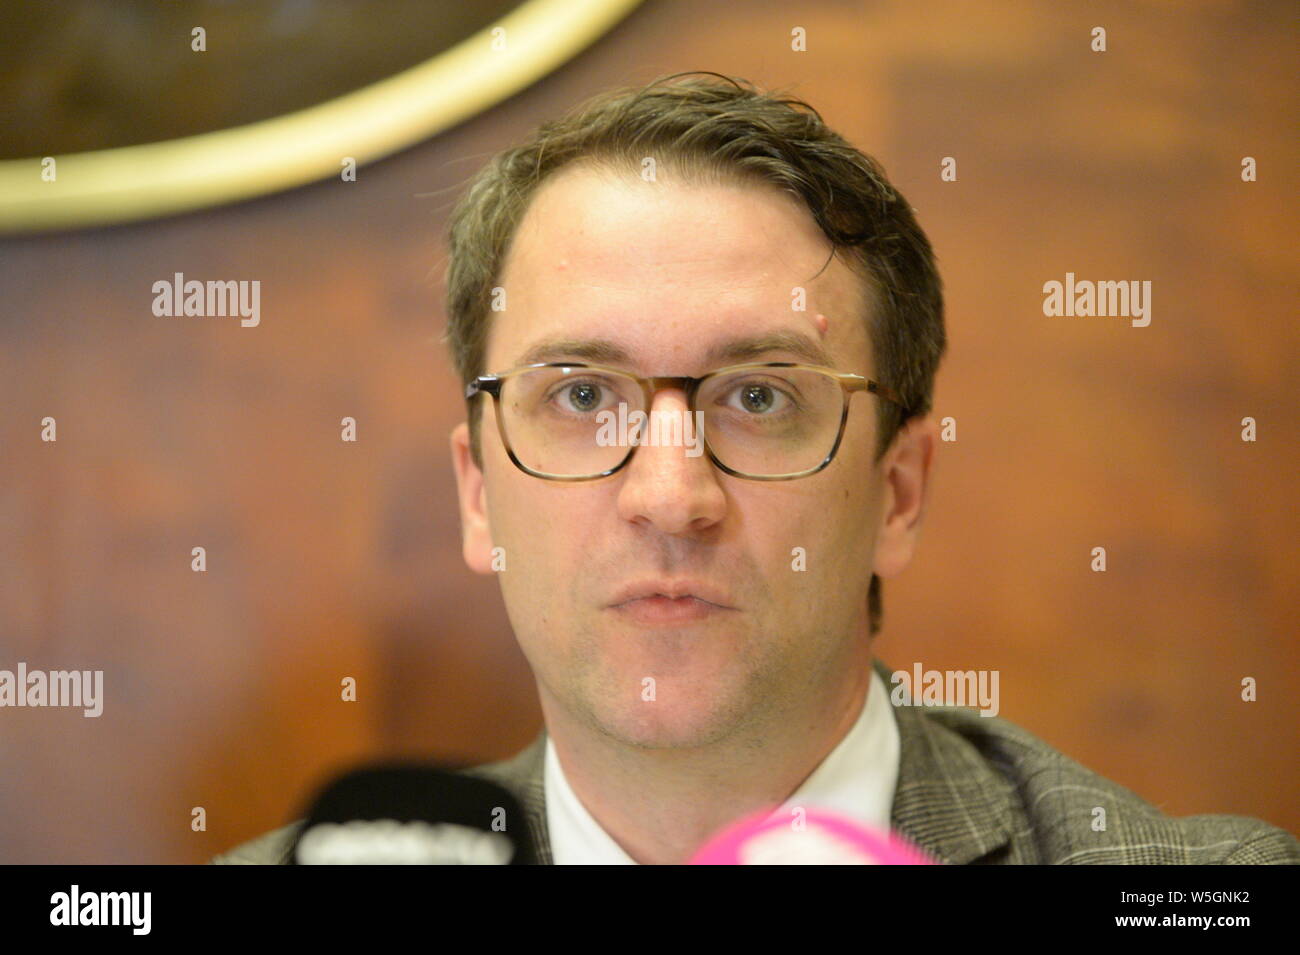 Vienna, Austria. 29th July 2019. Press conference in which party leader Maria Stern announced the other candidates of the “Party NOW” (Partei Jetzt) – “Liste Pilz” for the National Council election 2019. Picture shows candidate Thomas Walach. Credit: Franz Perc / Alamy Live News Stock Photo